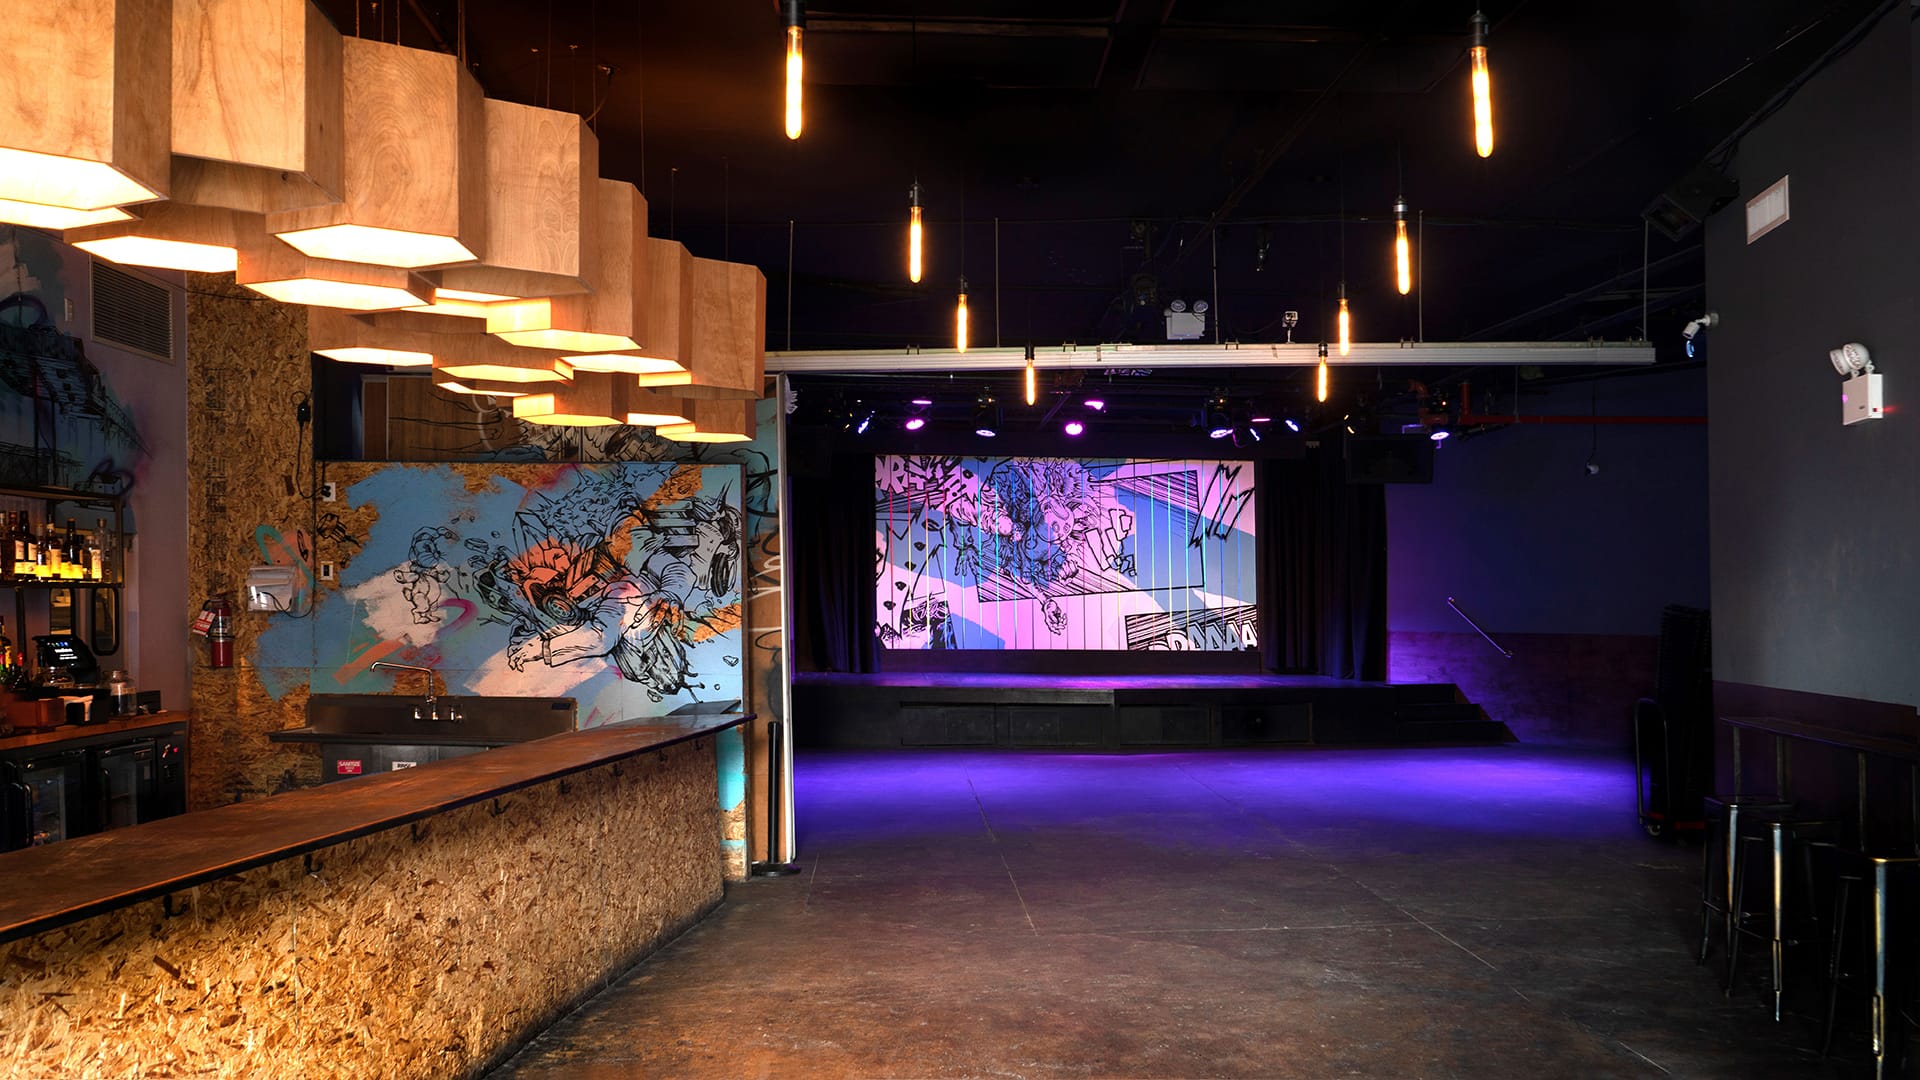 A large room containing a stage at the far end and a bar at the front left of the image. The bar is clad with cork, a mural lines the walls behind the bar, and a custom-made honeycomb light fixture hangs above it. Pendant lights in two straight lines lead back toward the stage, which has a custom-designed backdrop and lighting system.